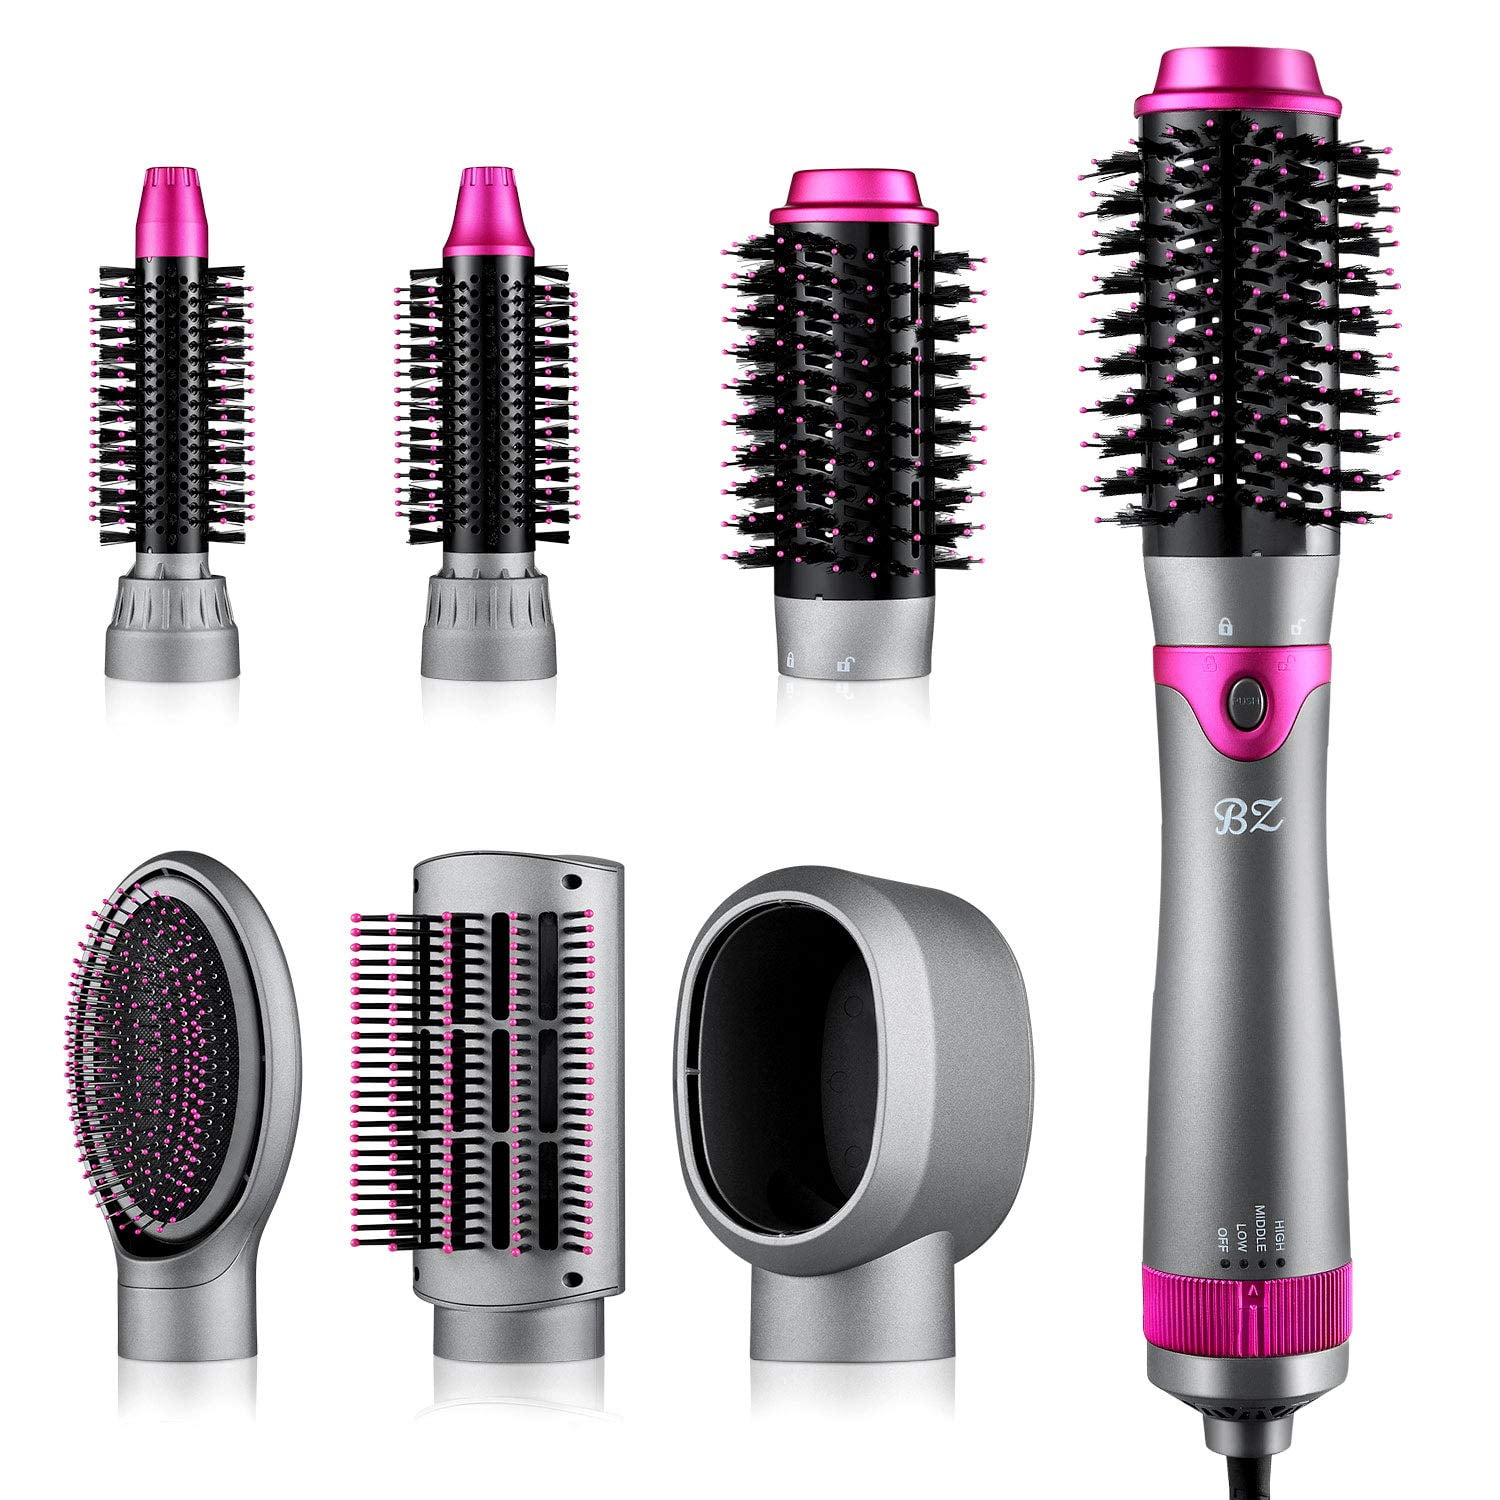 6 in 1 Hair Dryer Brush and Volumizer, Detachable Hair Dryer Styler, One-Step  Hot Air Brush for Straightening Curling Drying Combing Scalp Massage  Styling 